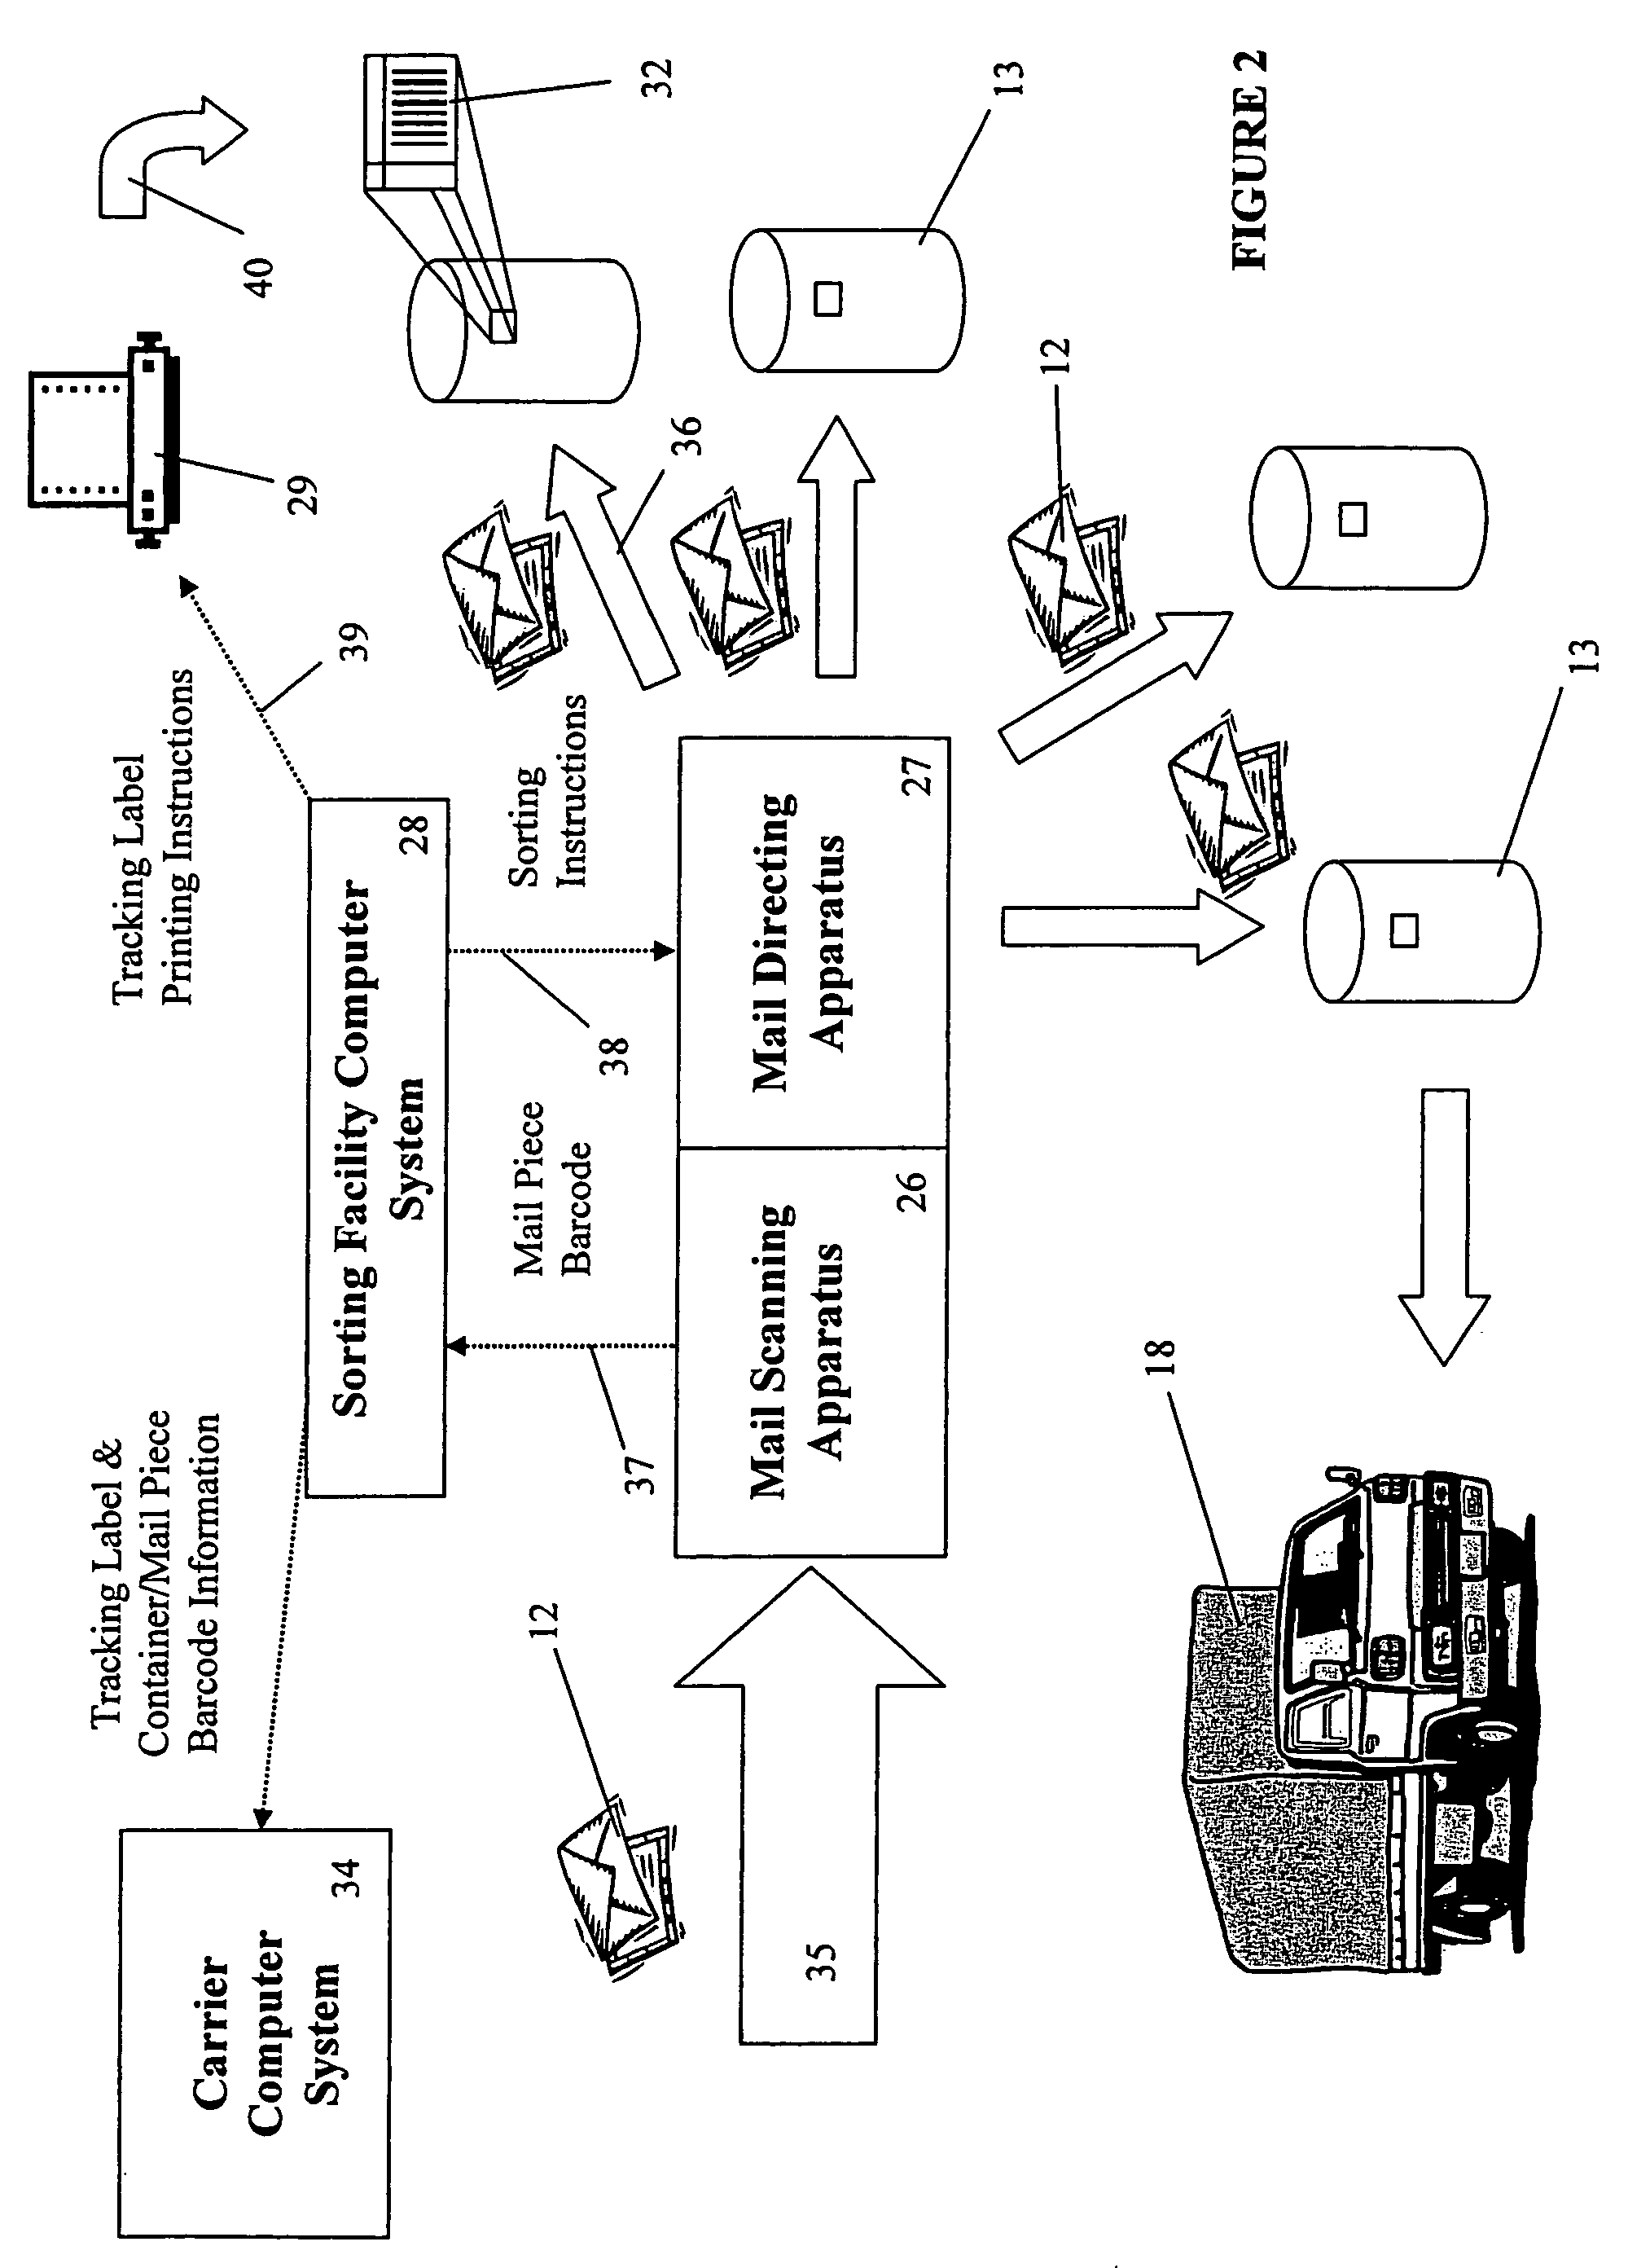 System, method and computer program product for containerized shipping of mail pieces